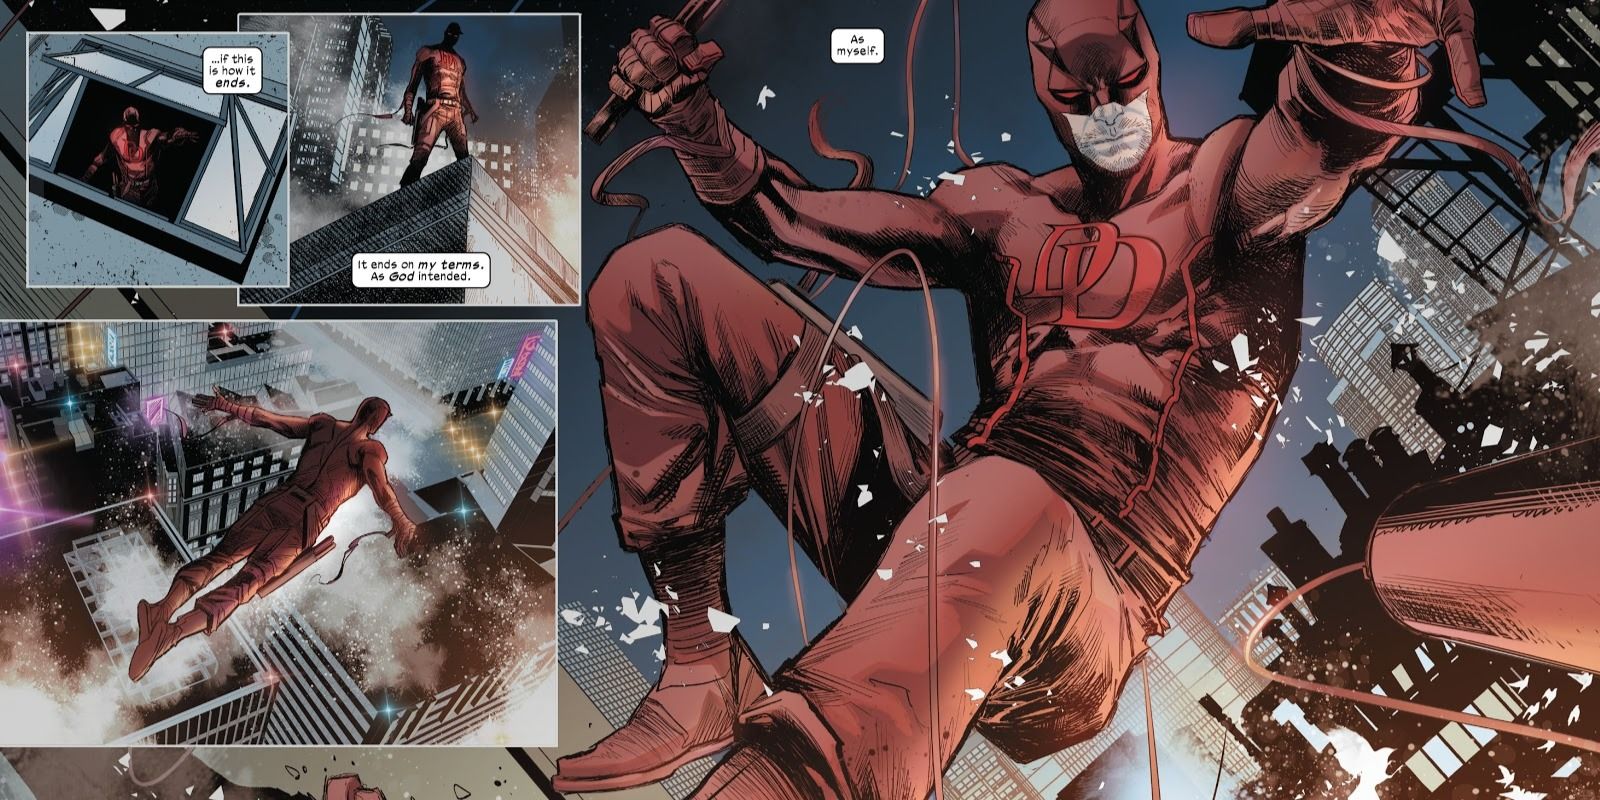 Daredevil back in his red suit in issue #21 of the current run